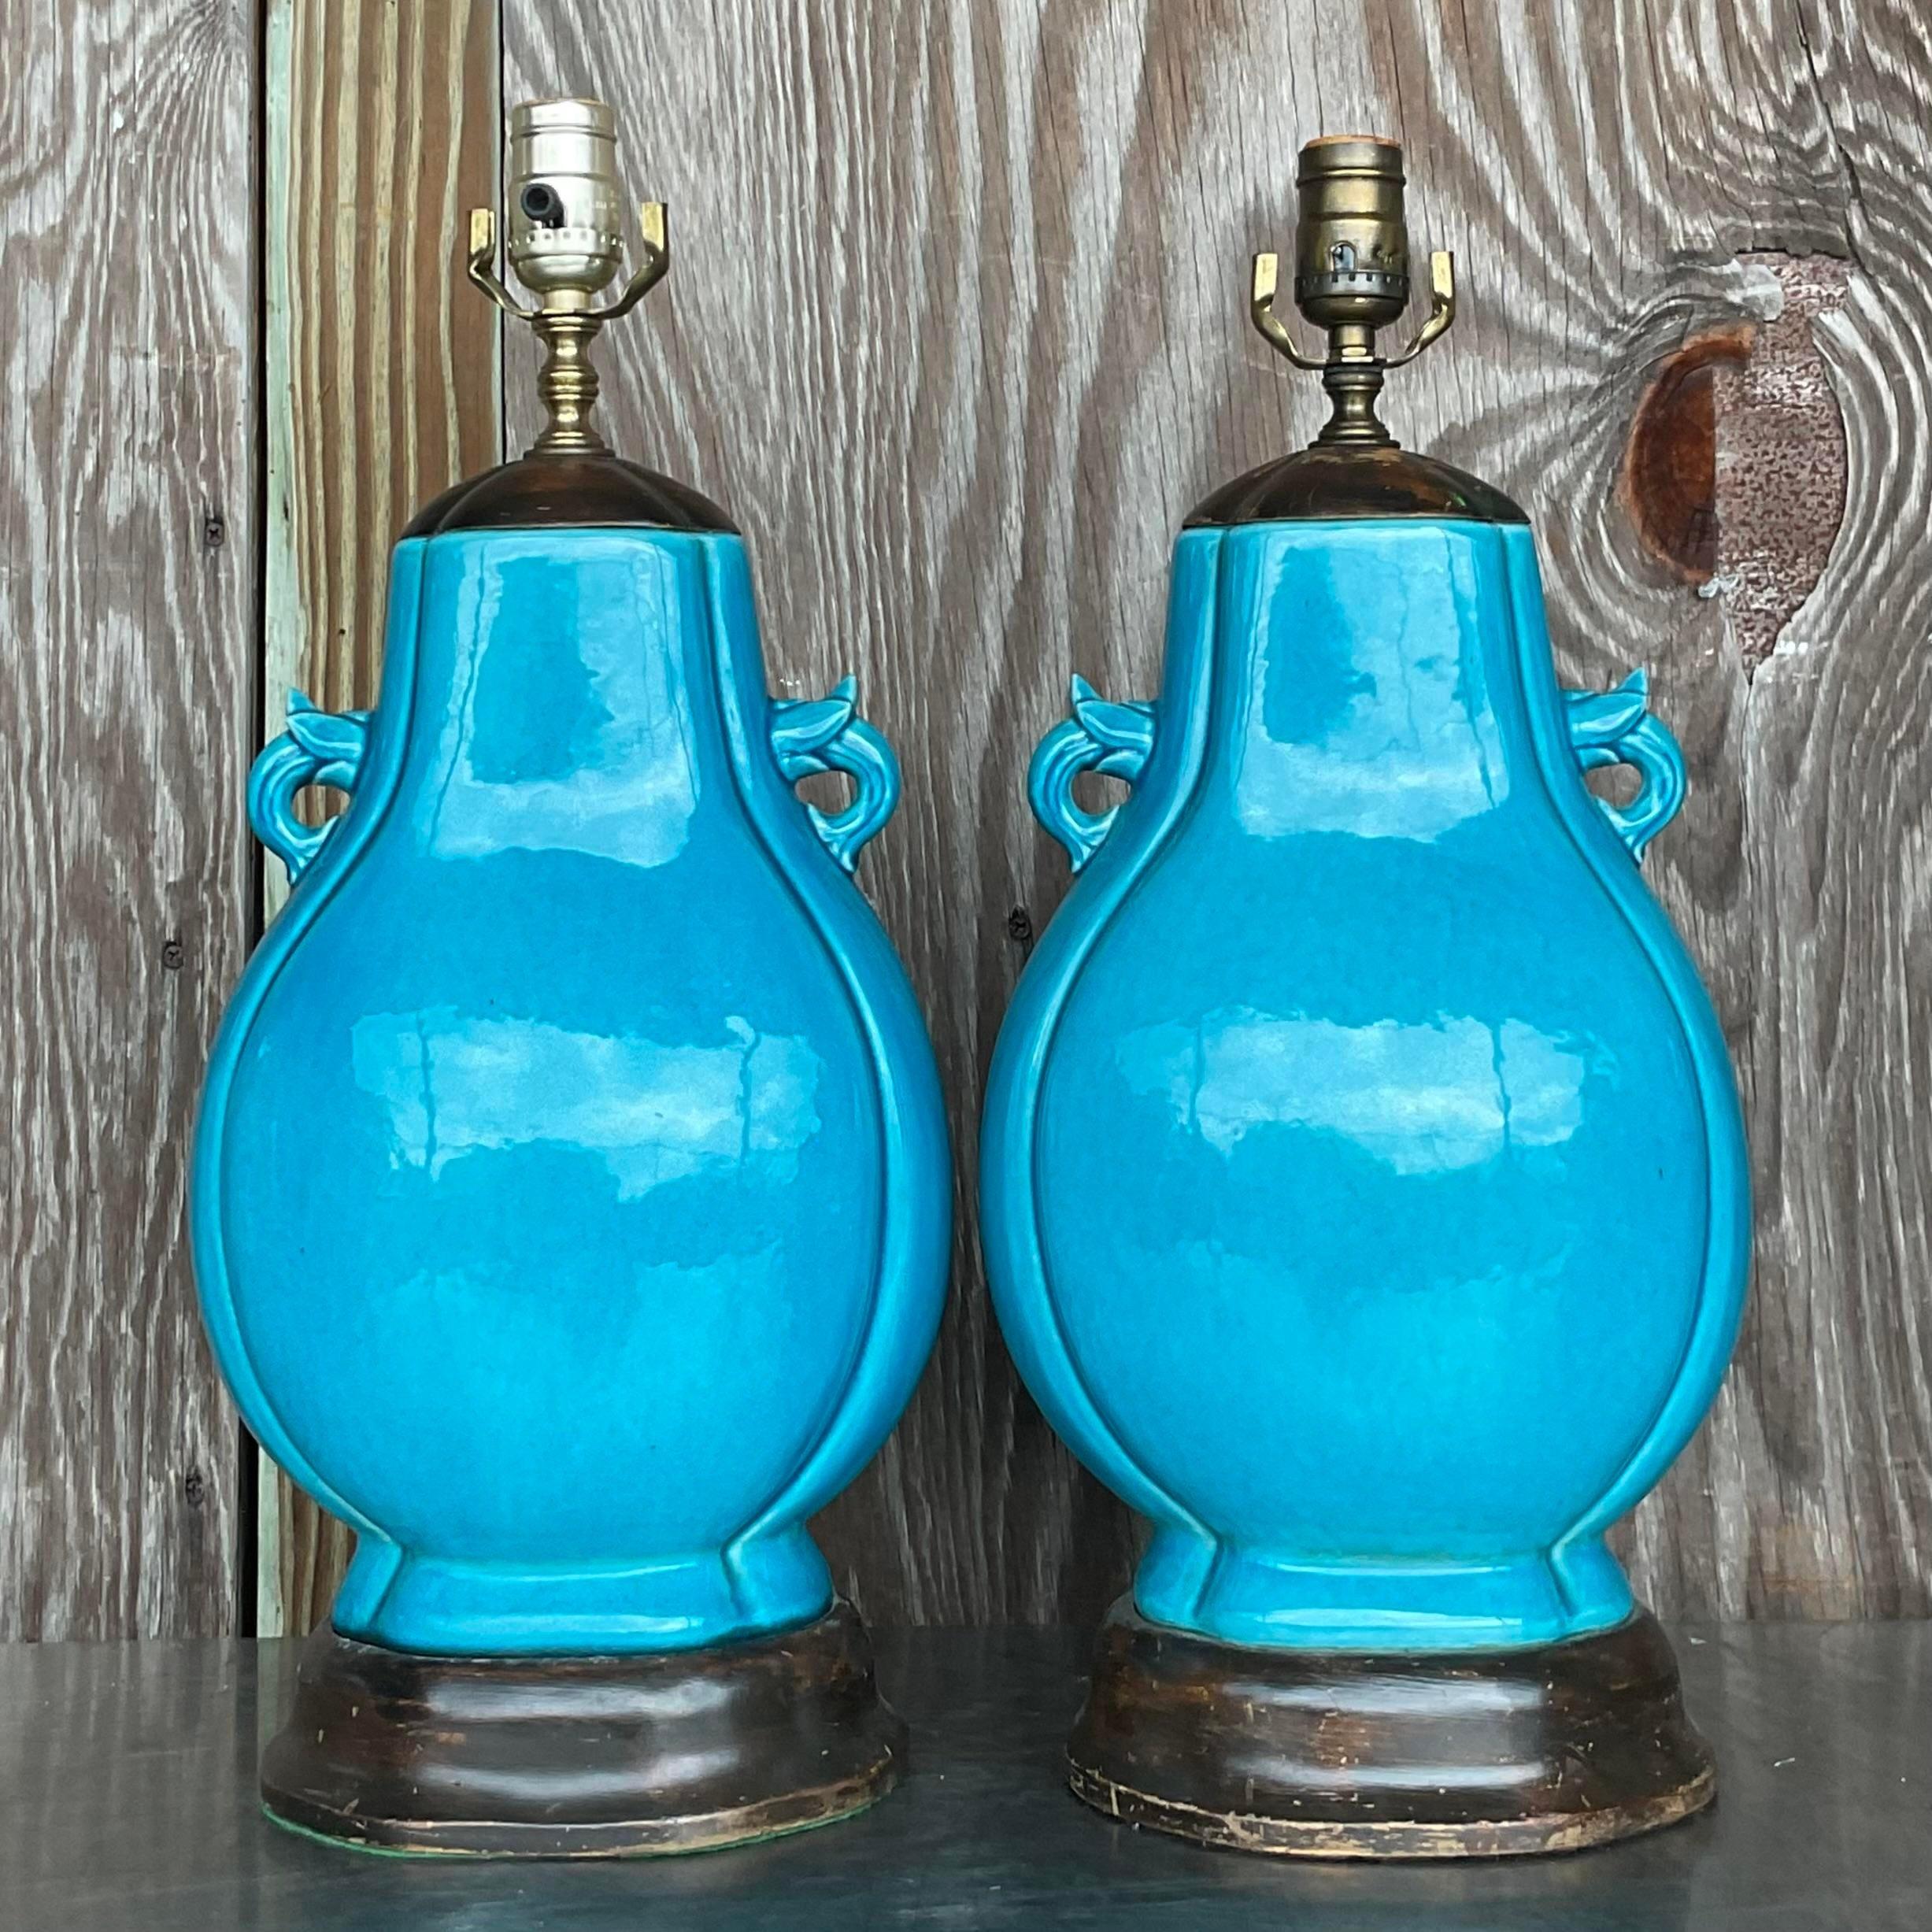 American Vintage Boho Turquoise Glazed Ceramic Moonflask Table Lamps - a Pair For Sale